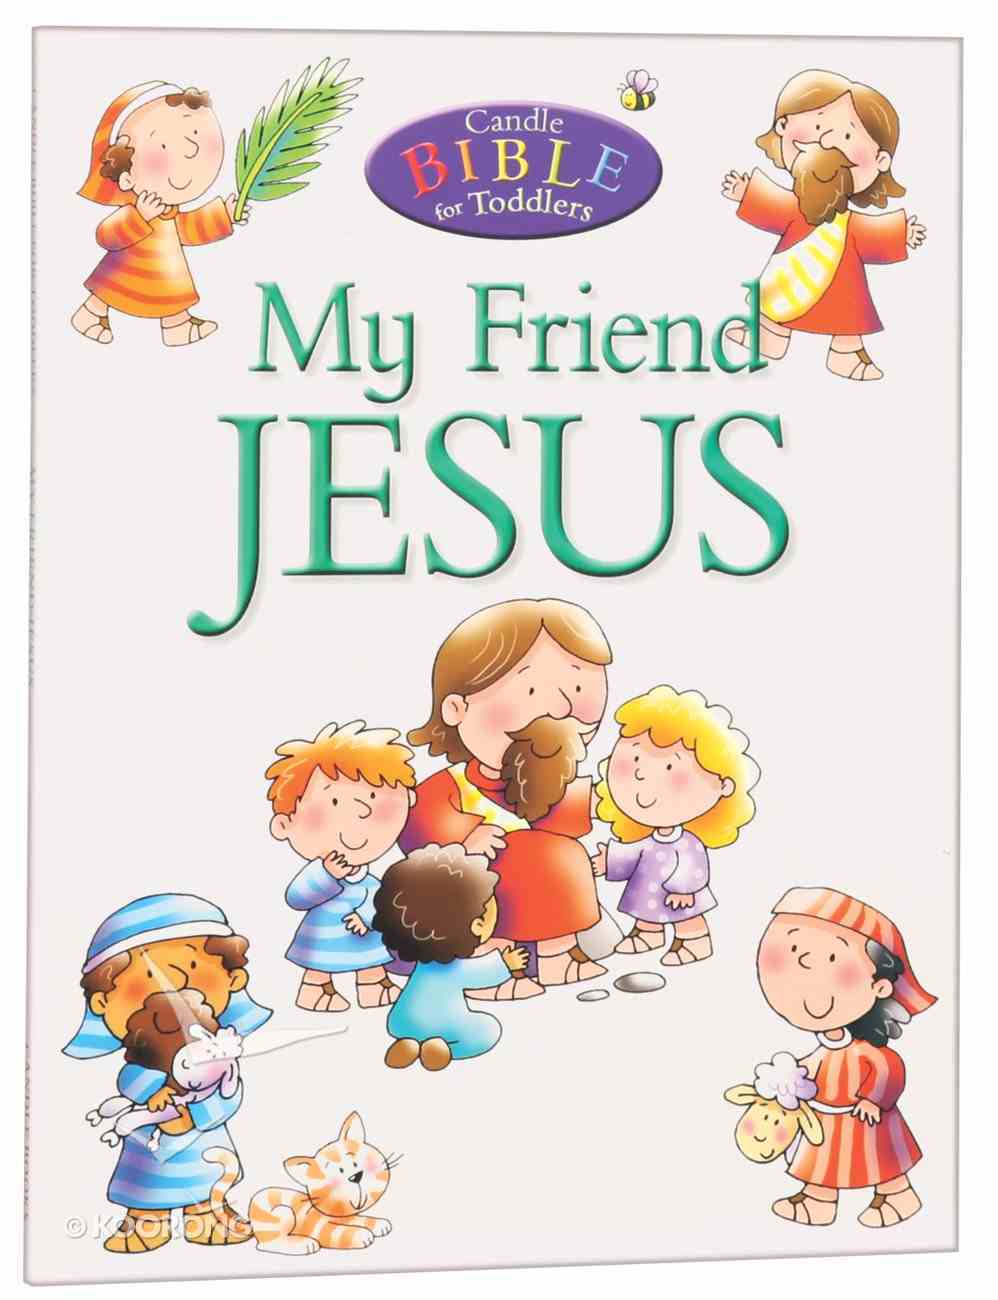 My Friend Jesus (Candle Bible For Toddlers Series) Paperback